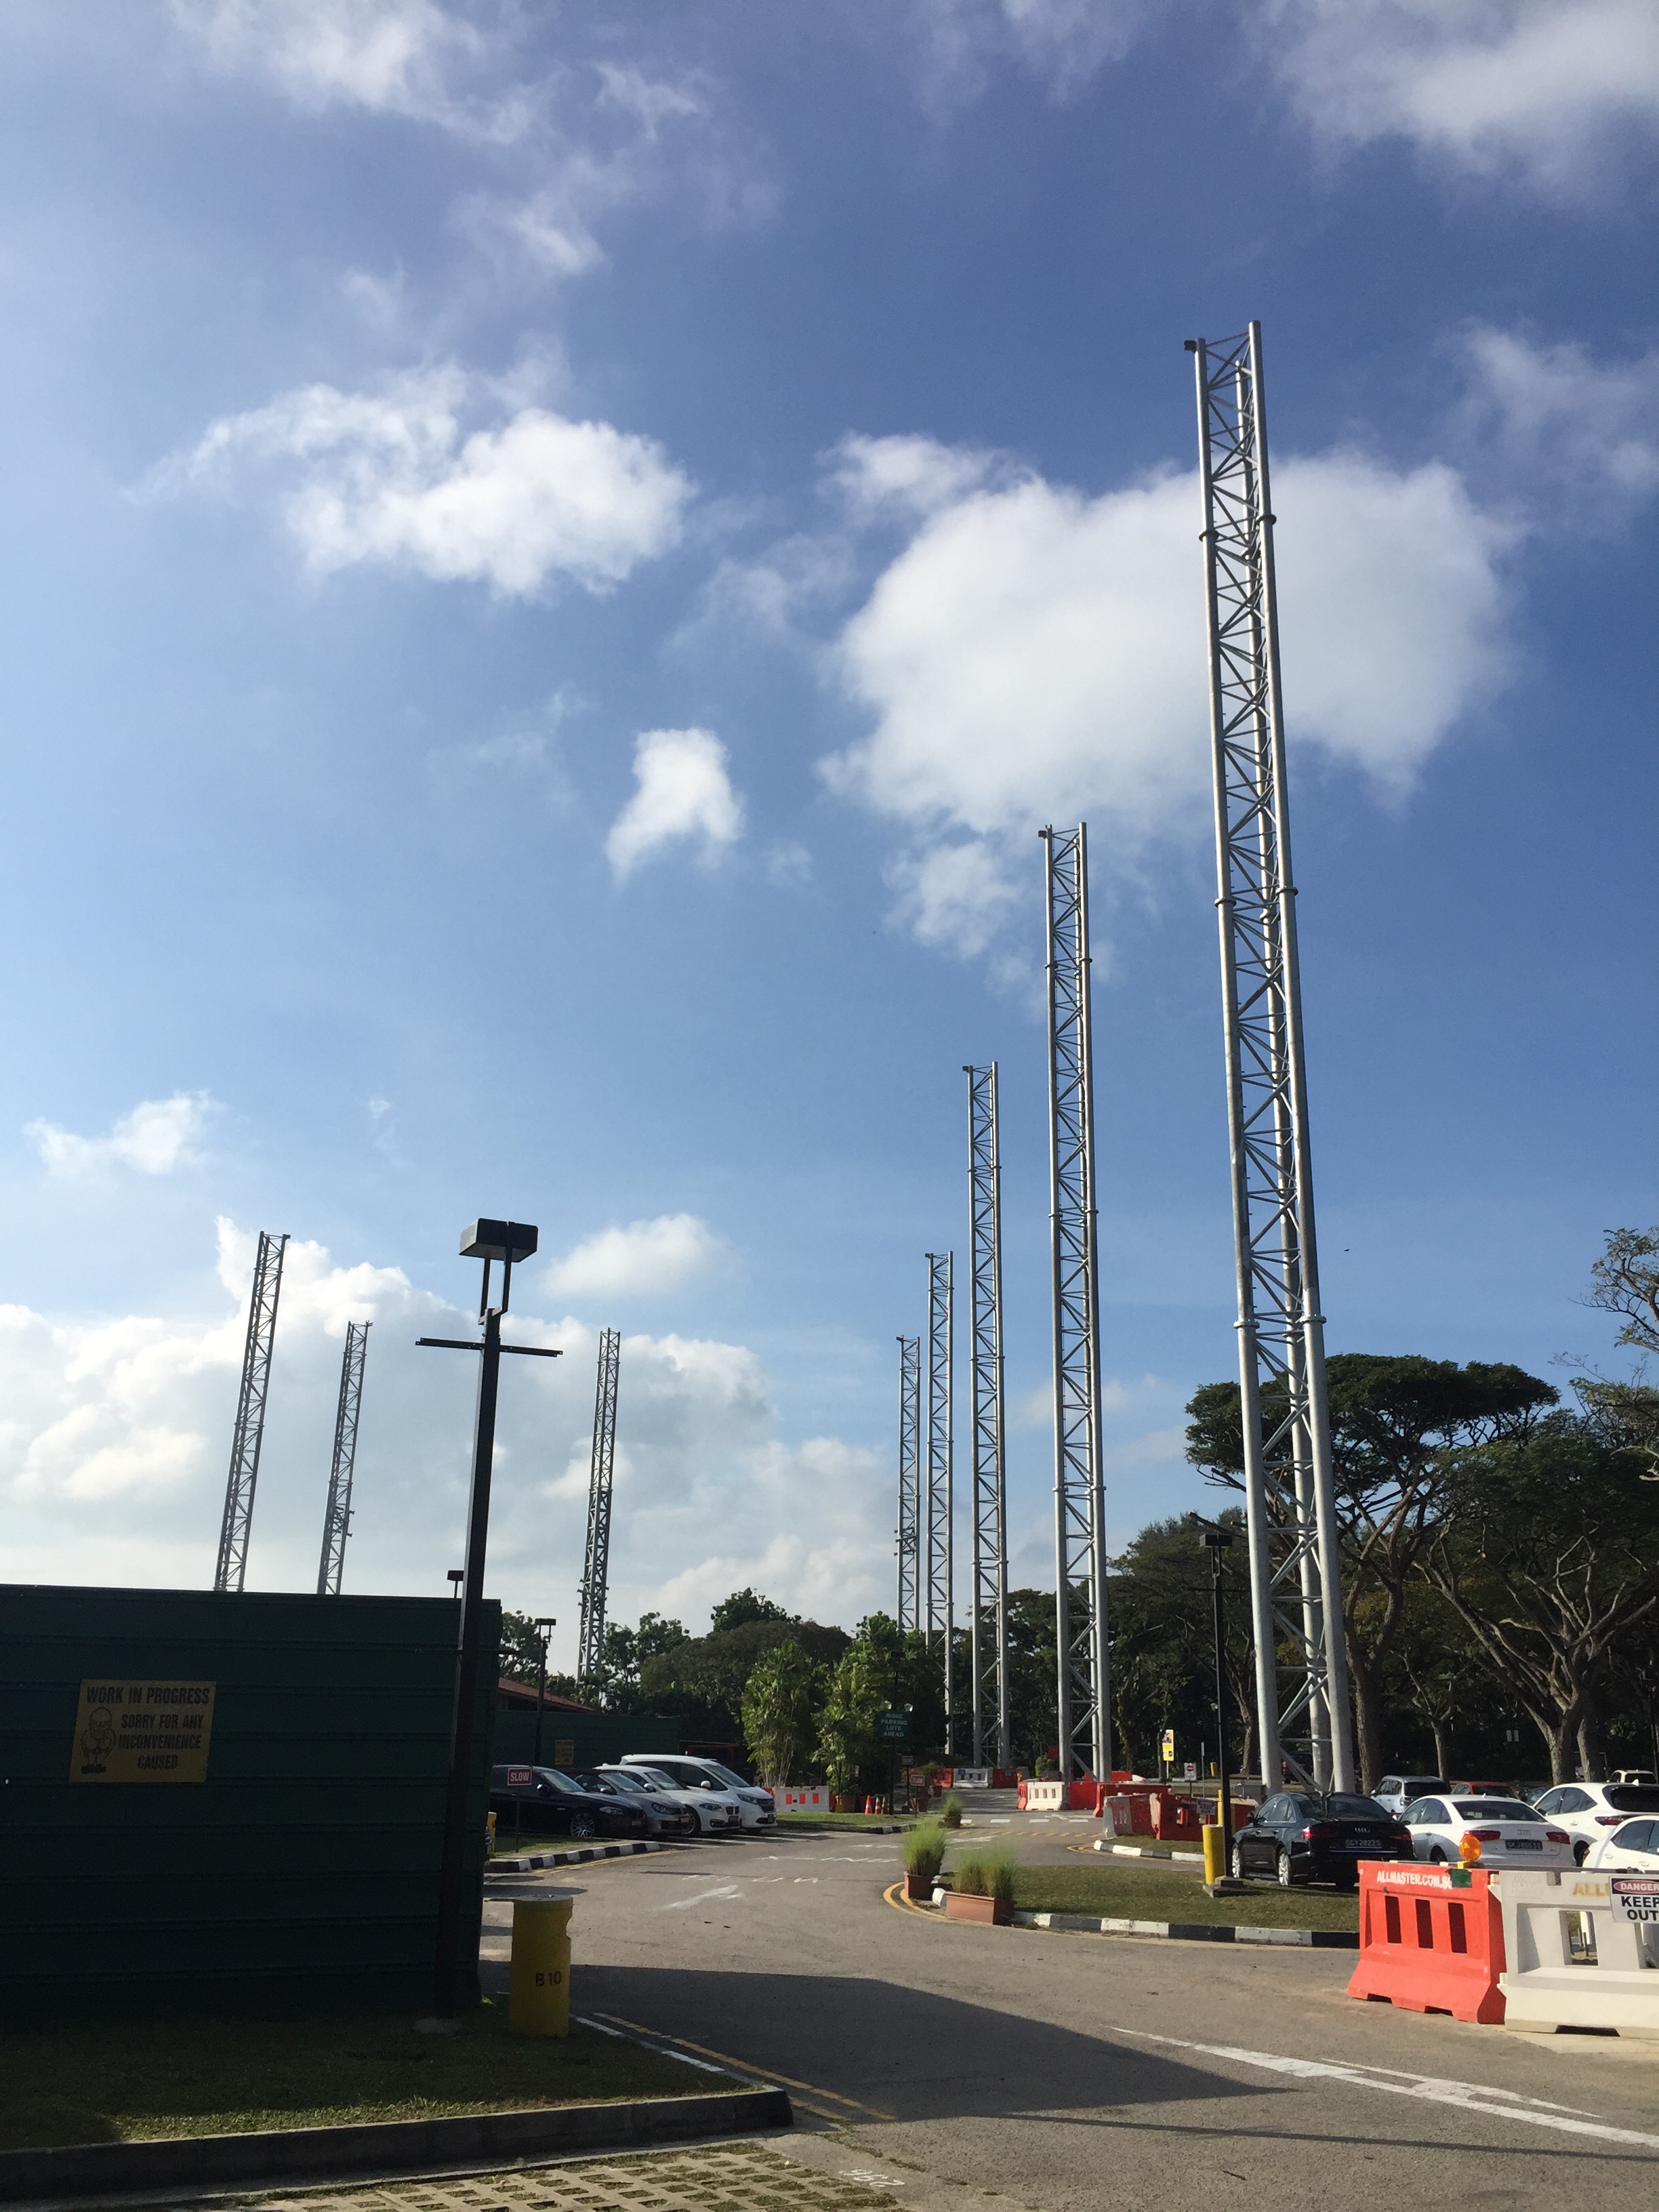 More high masts had been erected on site near the existing maintenance building